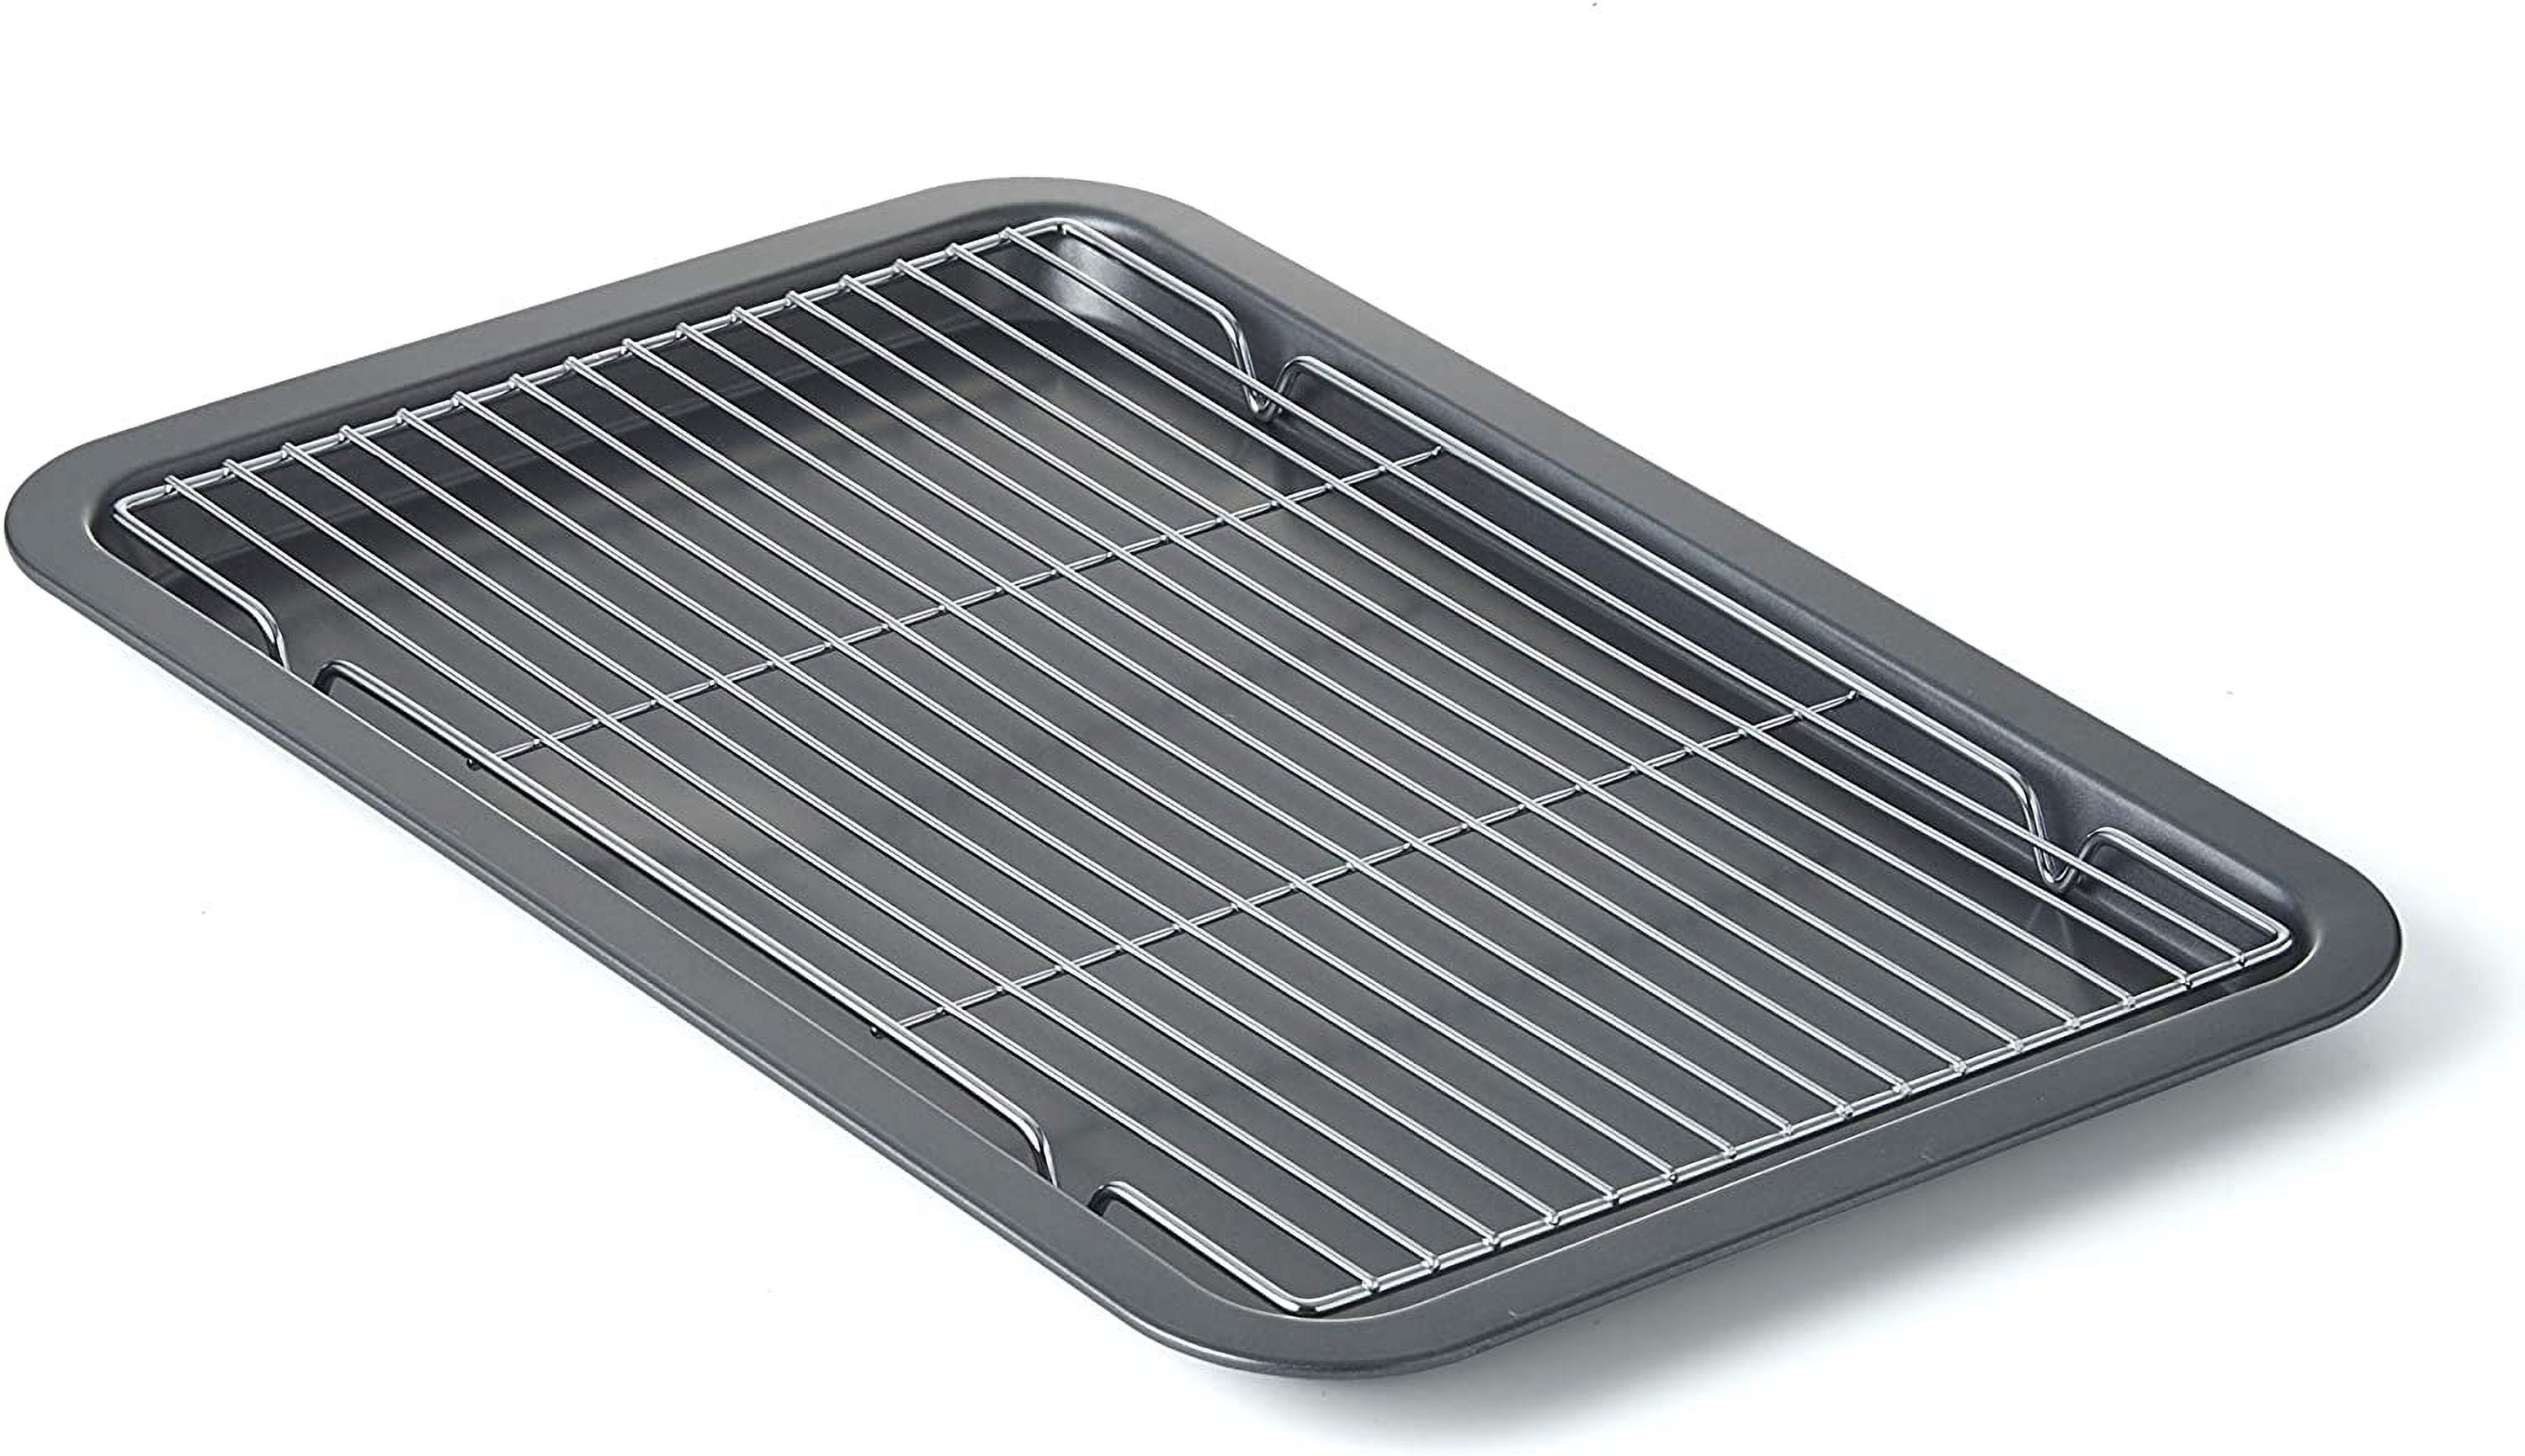 Nifty All in 1 Oven Crisper Baking Pan and Cooling Rack – Non